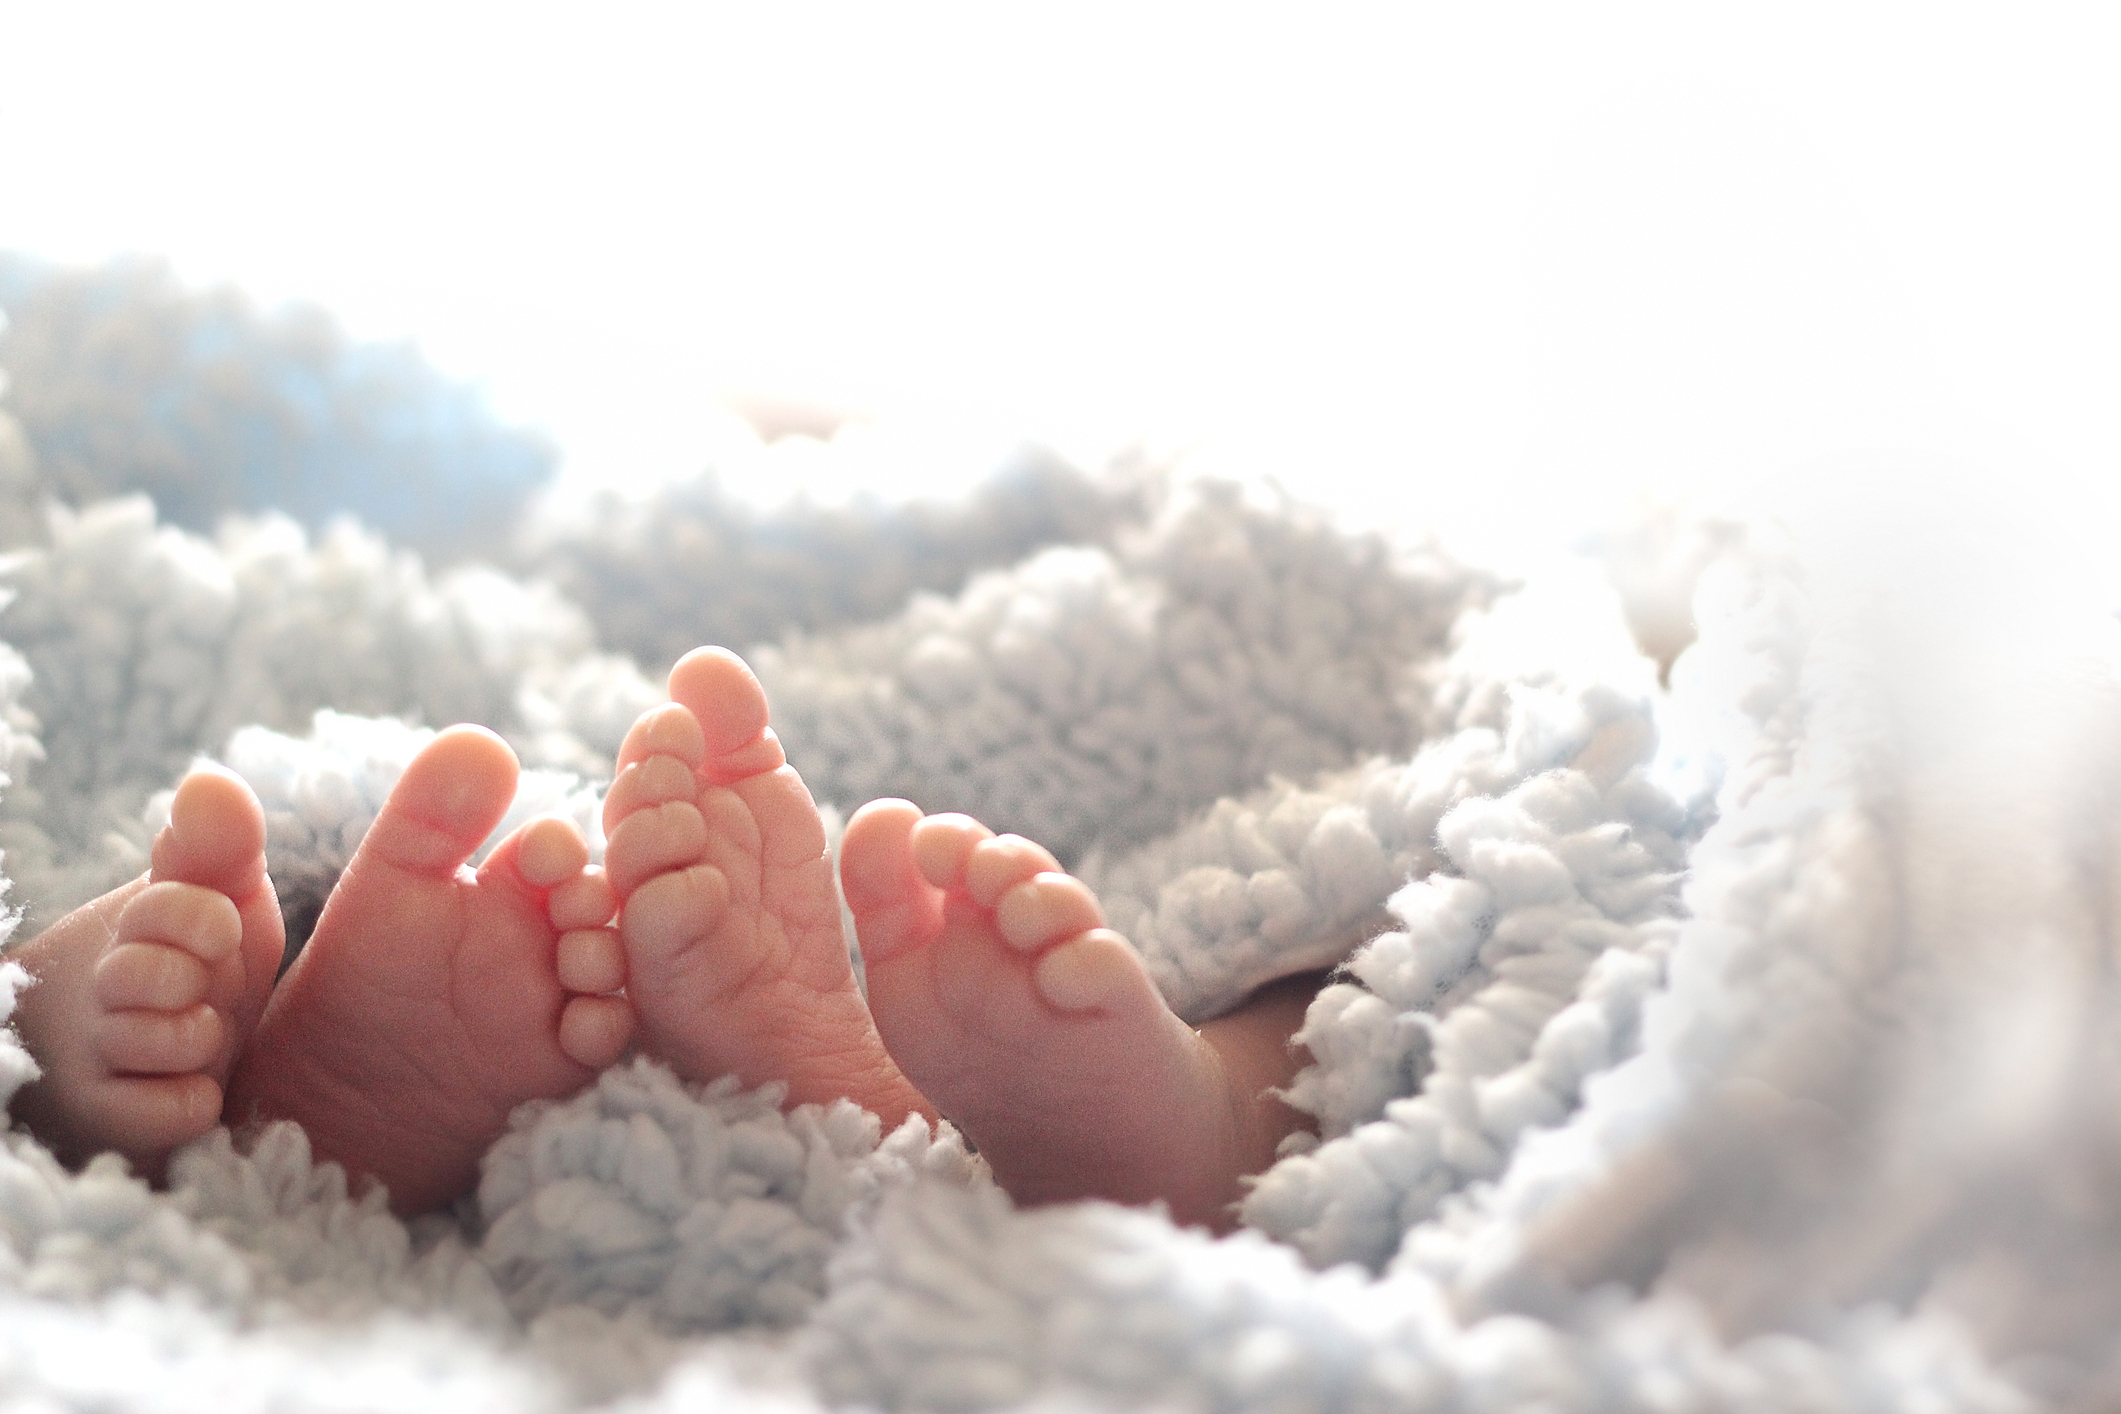 Close-up of feet peeking out from a soft blanket, symbolizing early stages of life and love